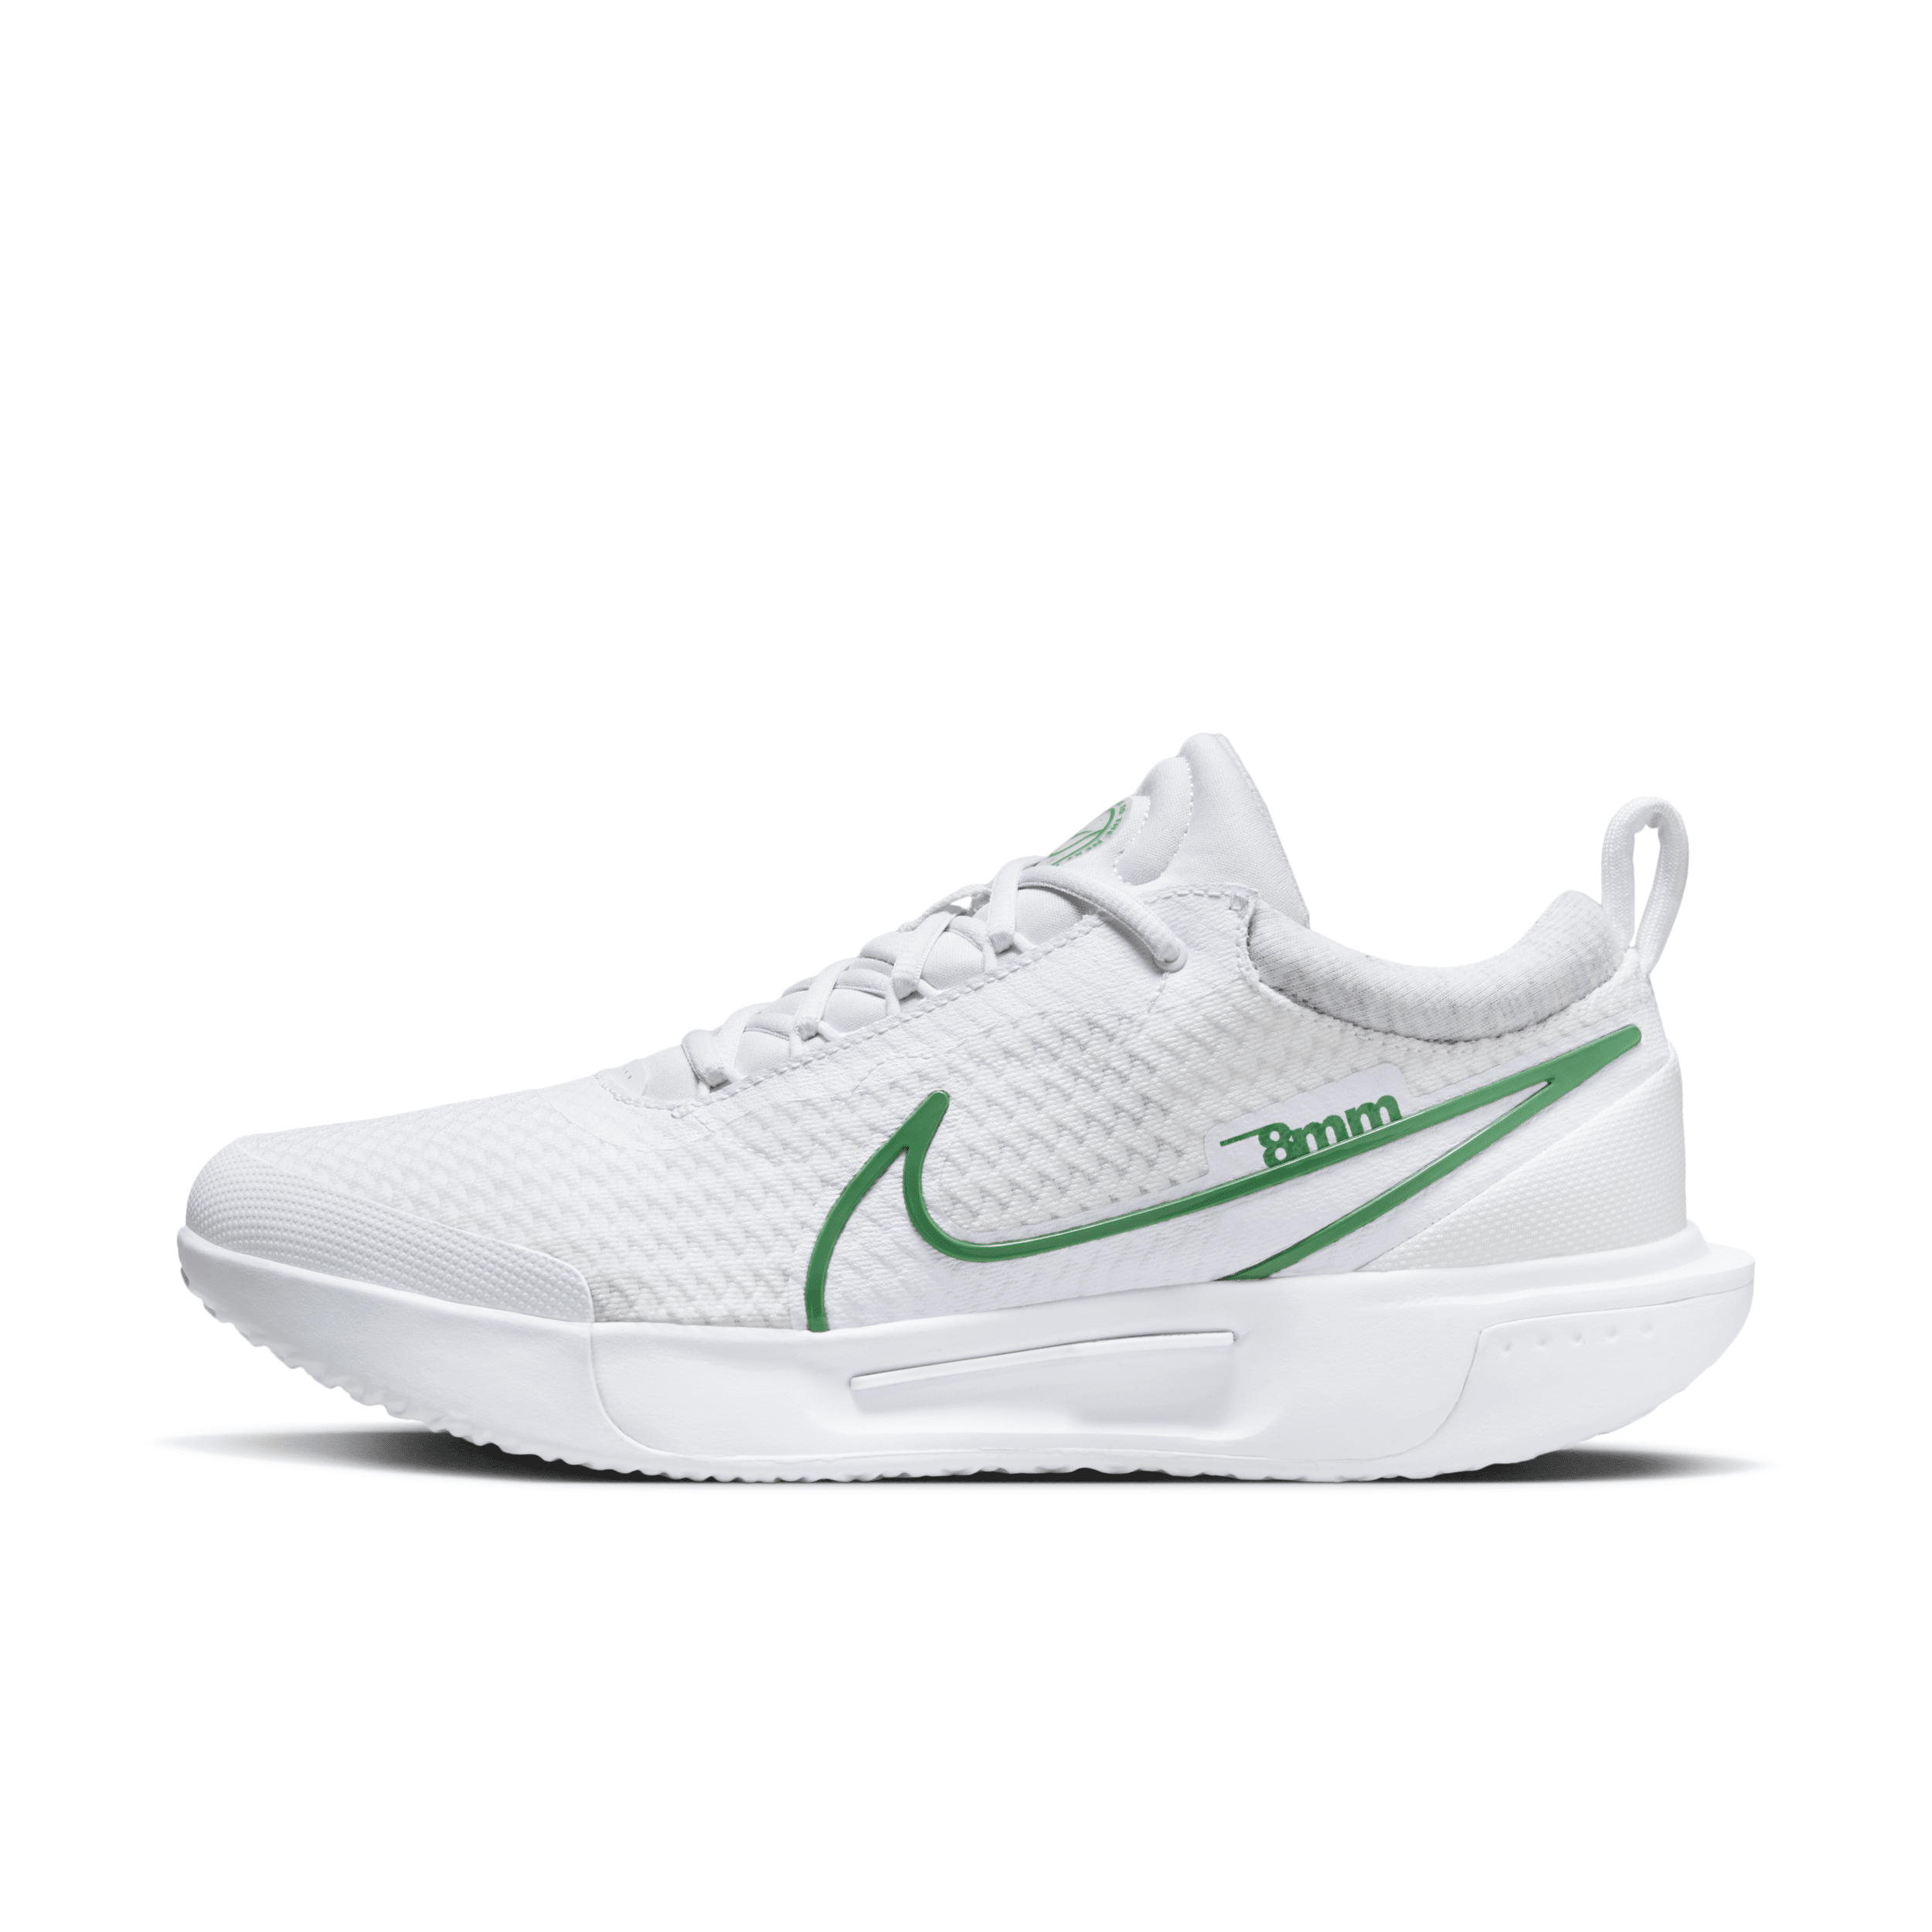 Nike Men's Court Zoom Pro Hard Court Tennis Shoes In White